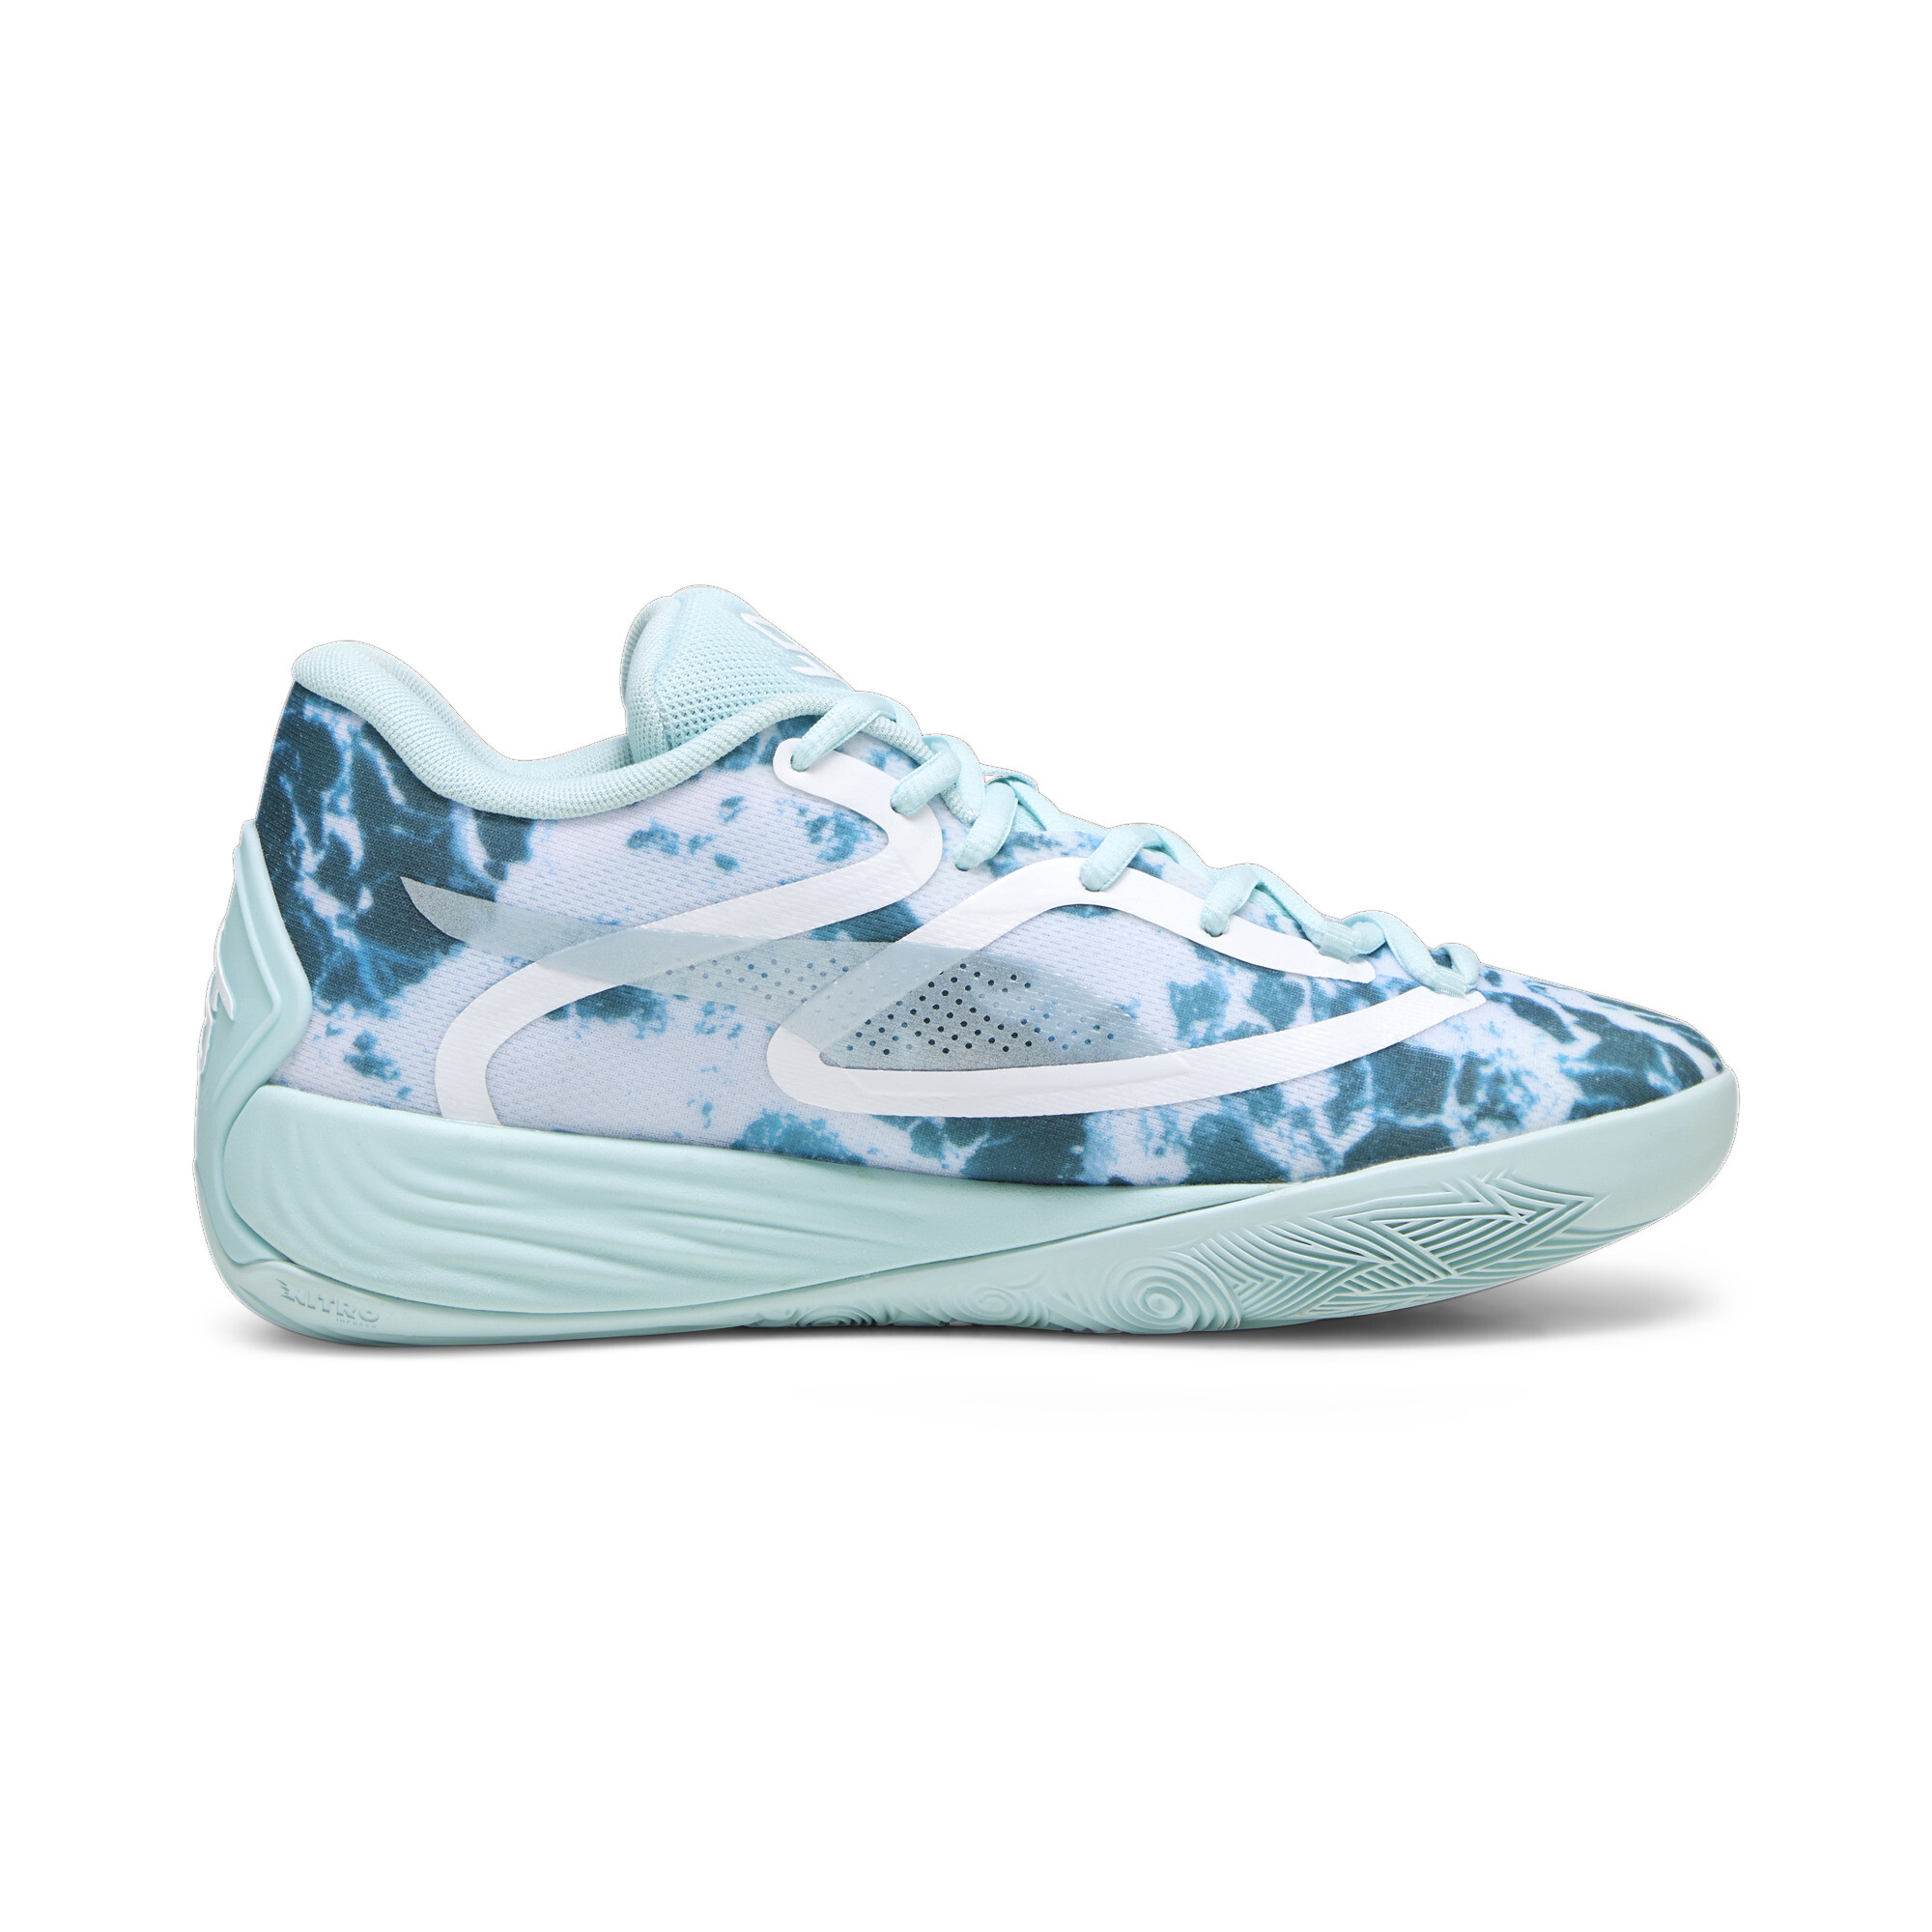 Women's Puma Stewie 2 Water's Basketball Shoes, Blue, Size 47, Shoes